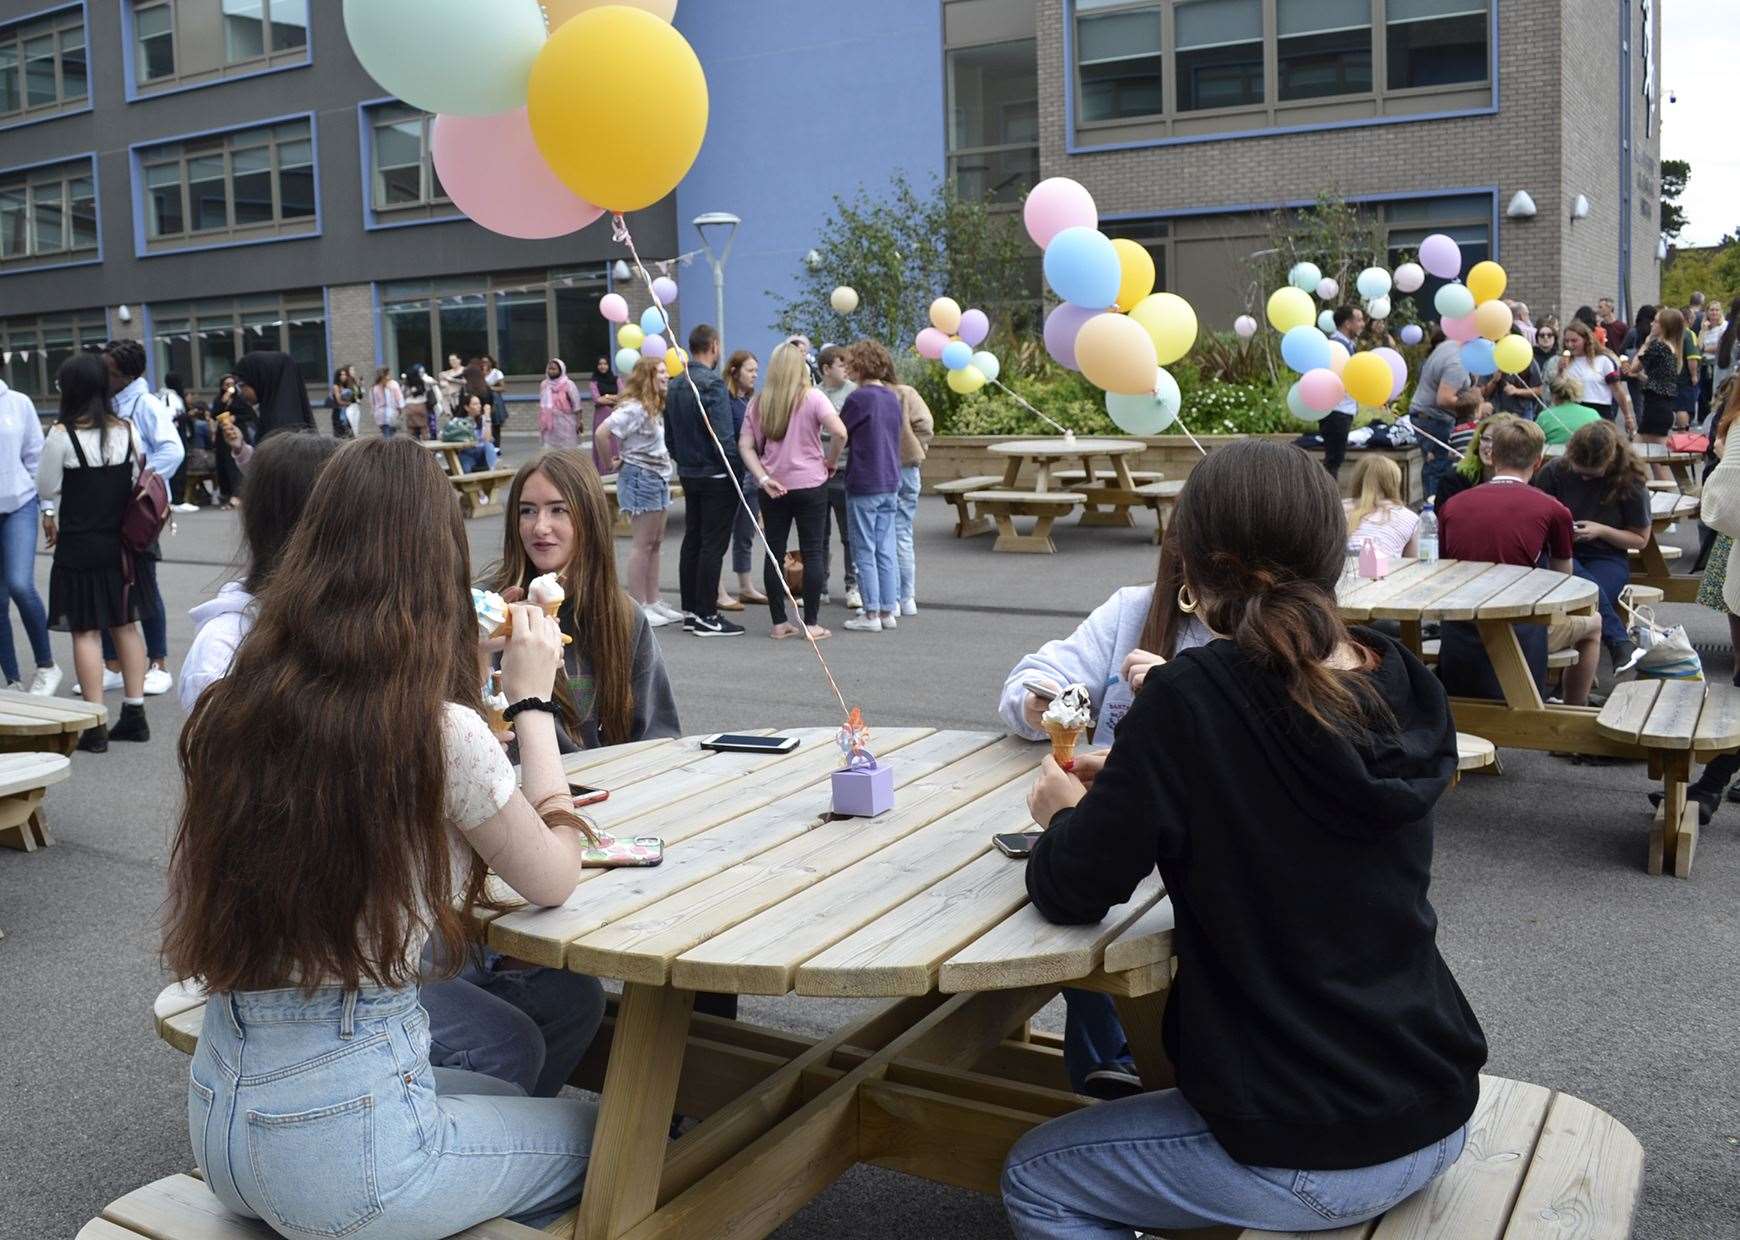 Year 11 pupils at Invicta Grammar School celebrate their GCSE results with a party